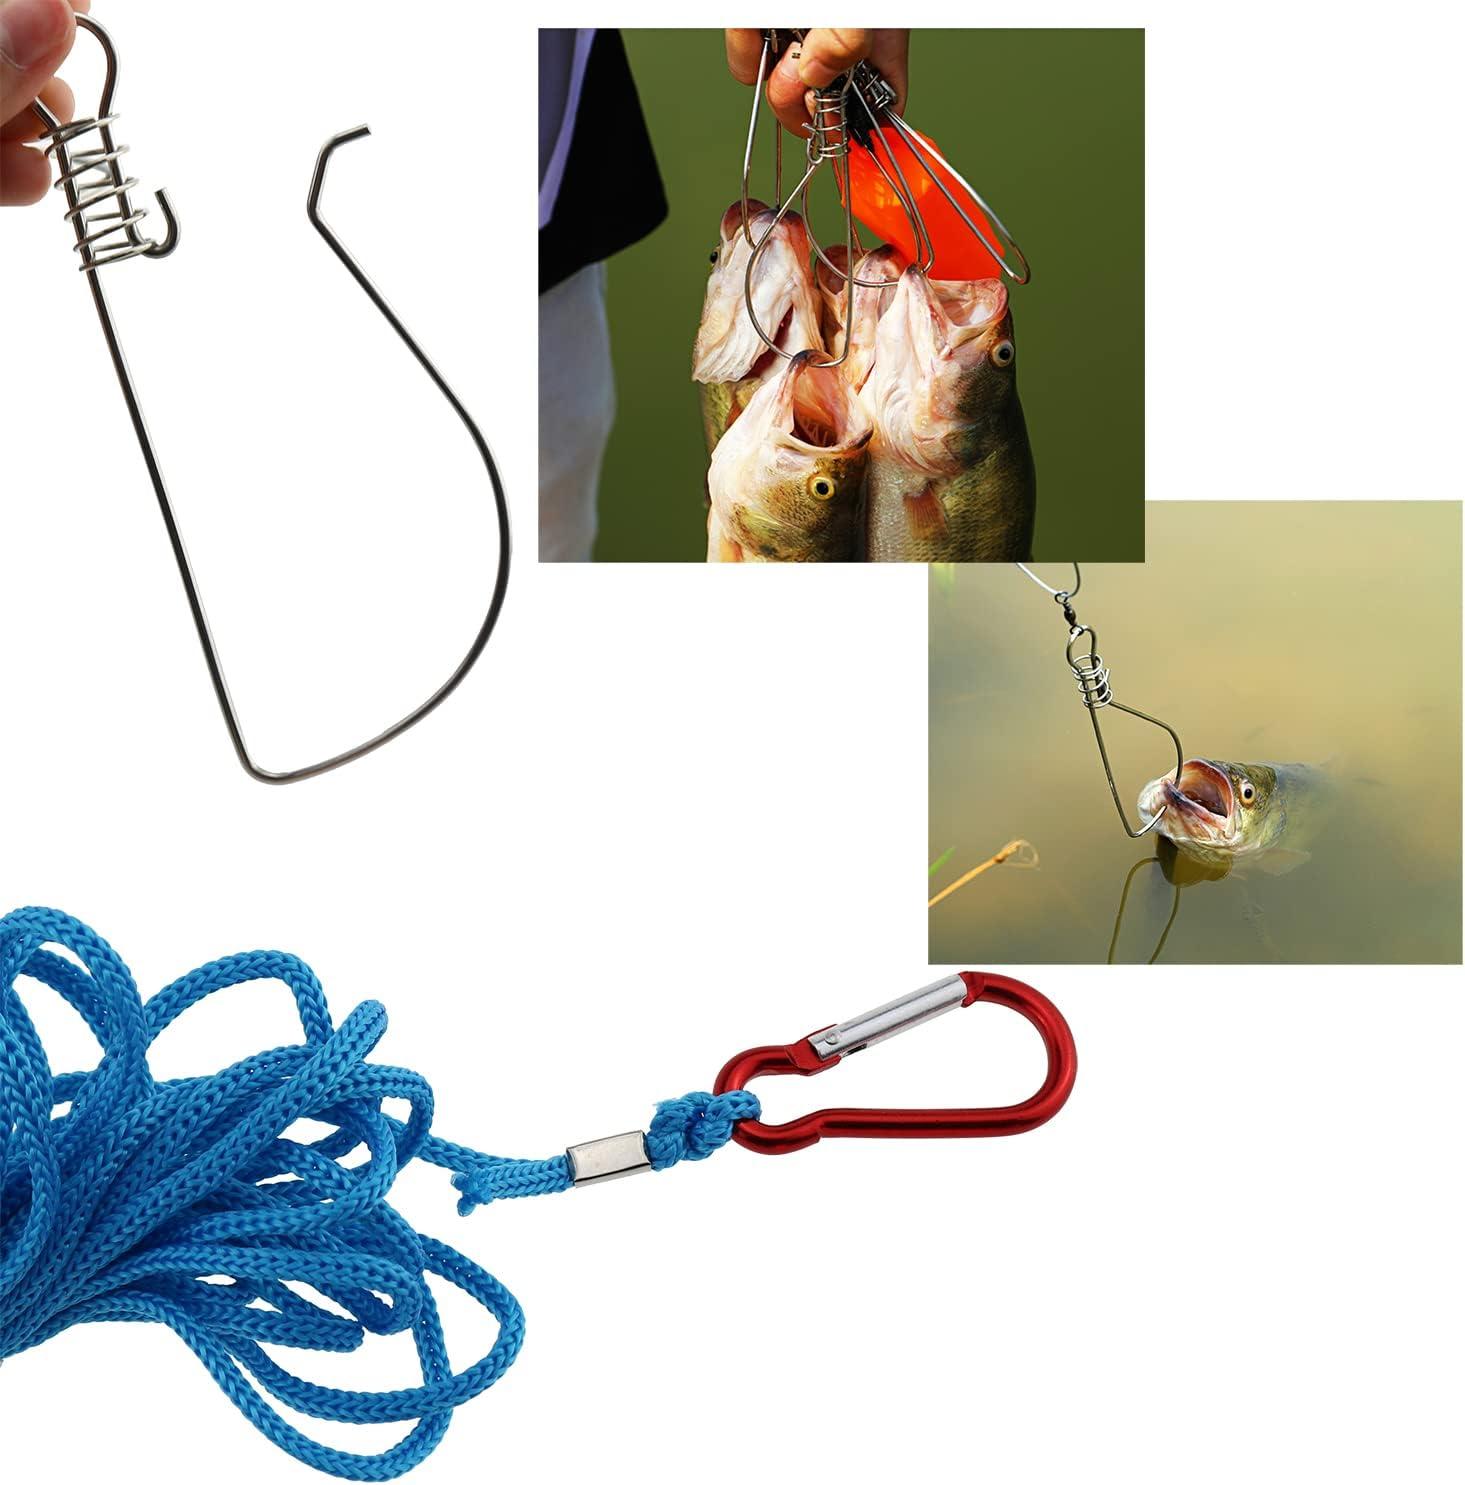 Buy Fish Stringer- Heavy Duty Rope Stringer for Fishing with 5